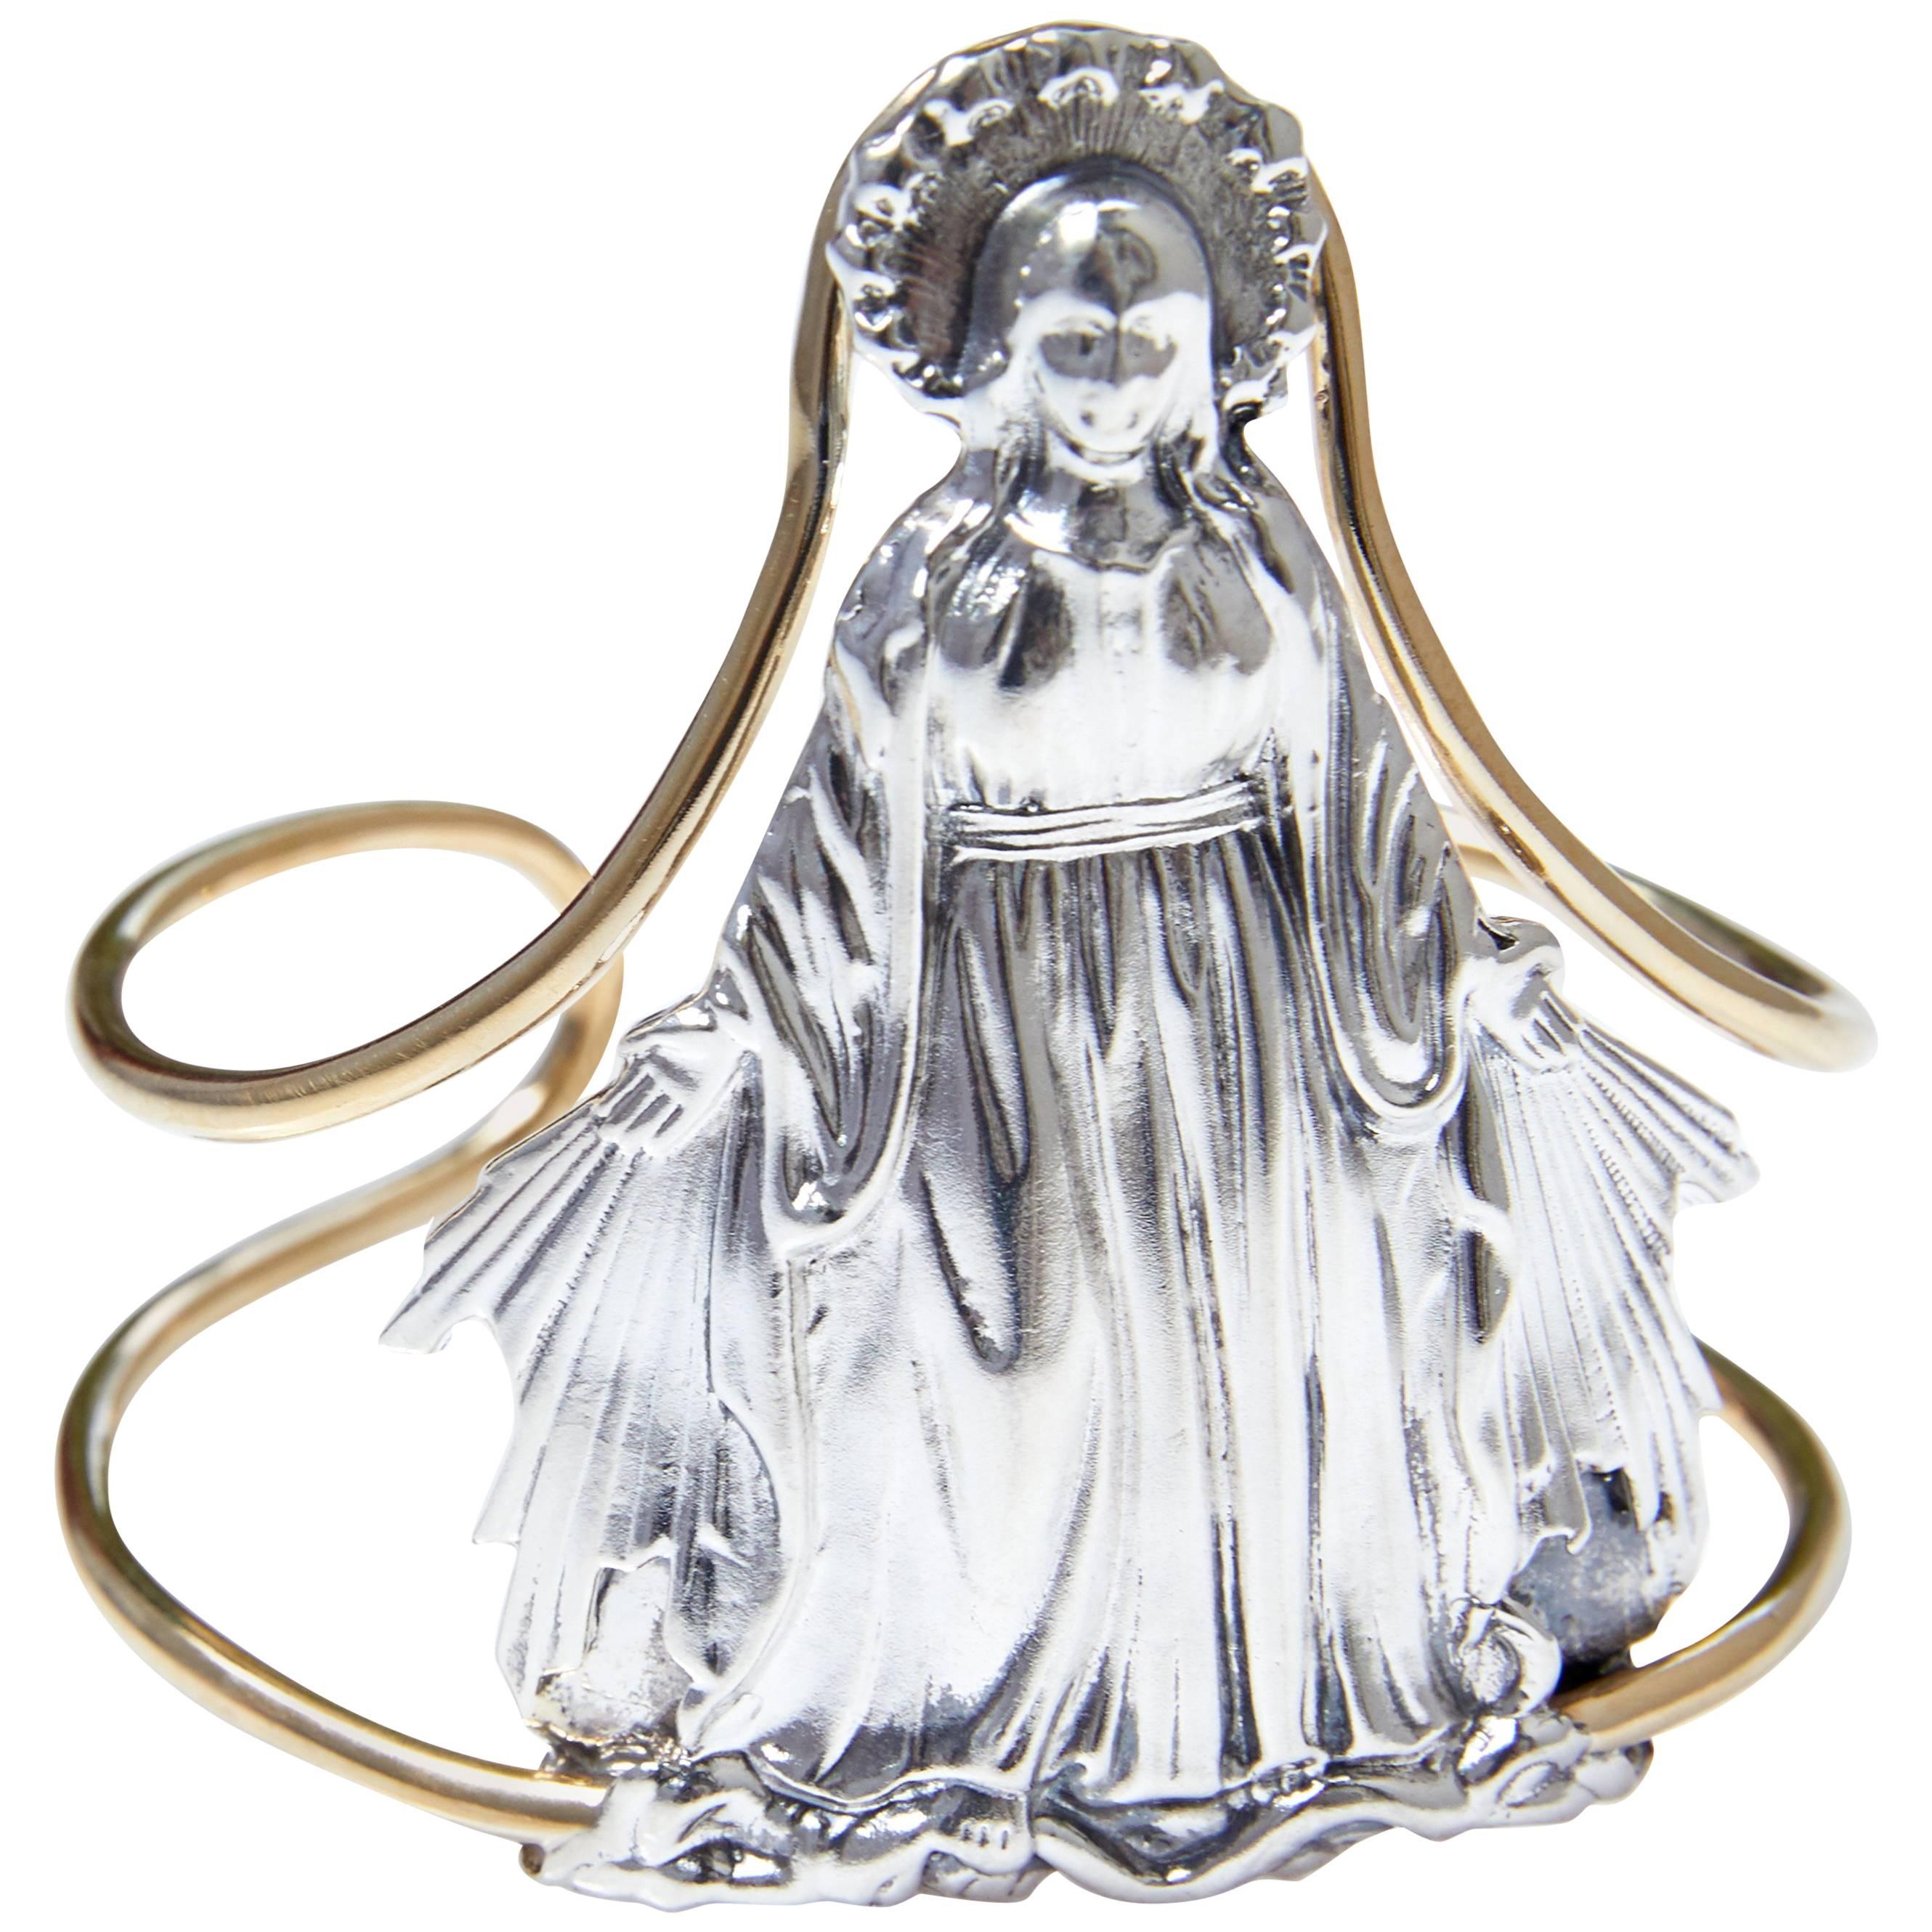 Virgin Mary Mother Mary Arm Cuff Bangle Bracelet Sterling Silver Brass J Dauphin

